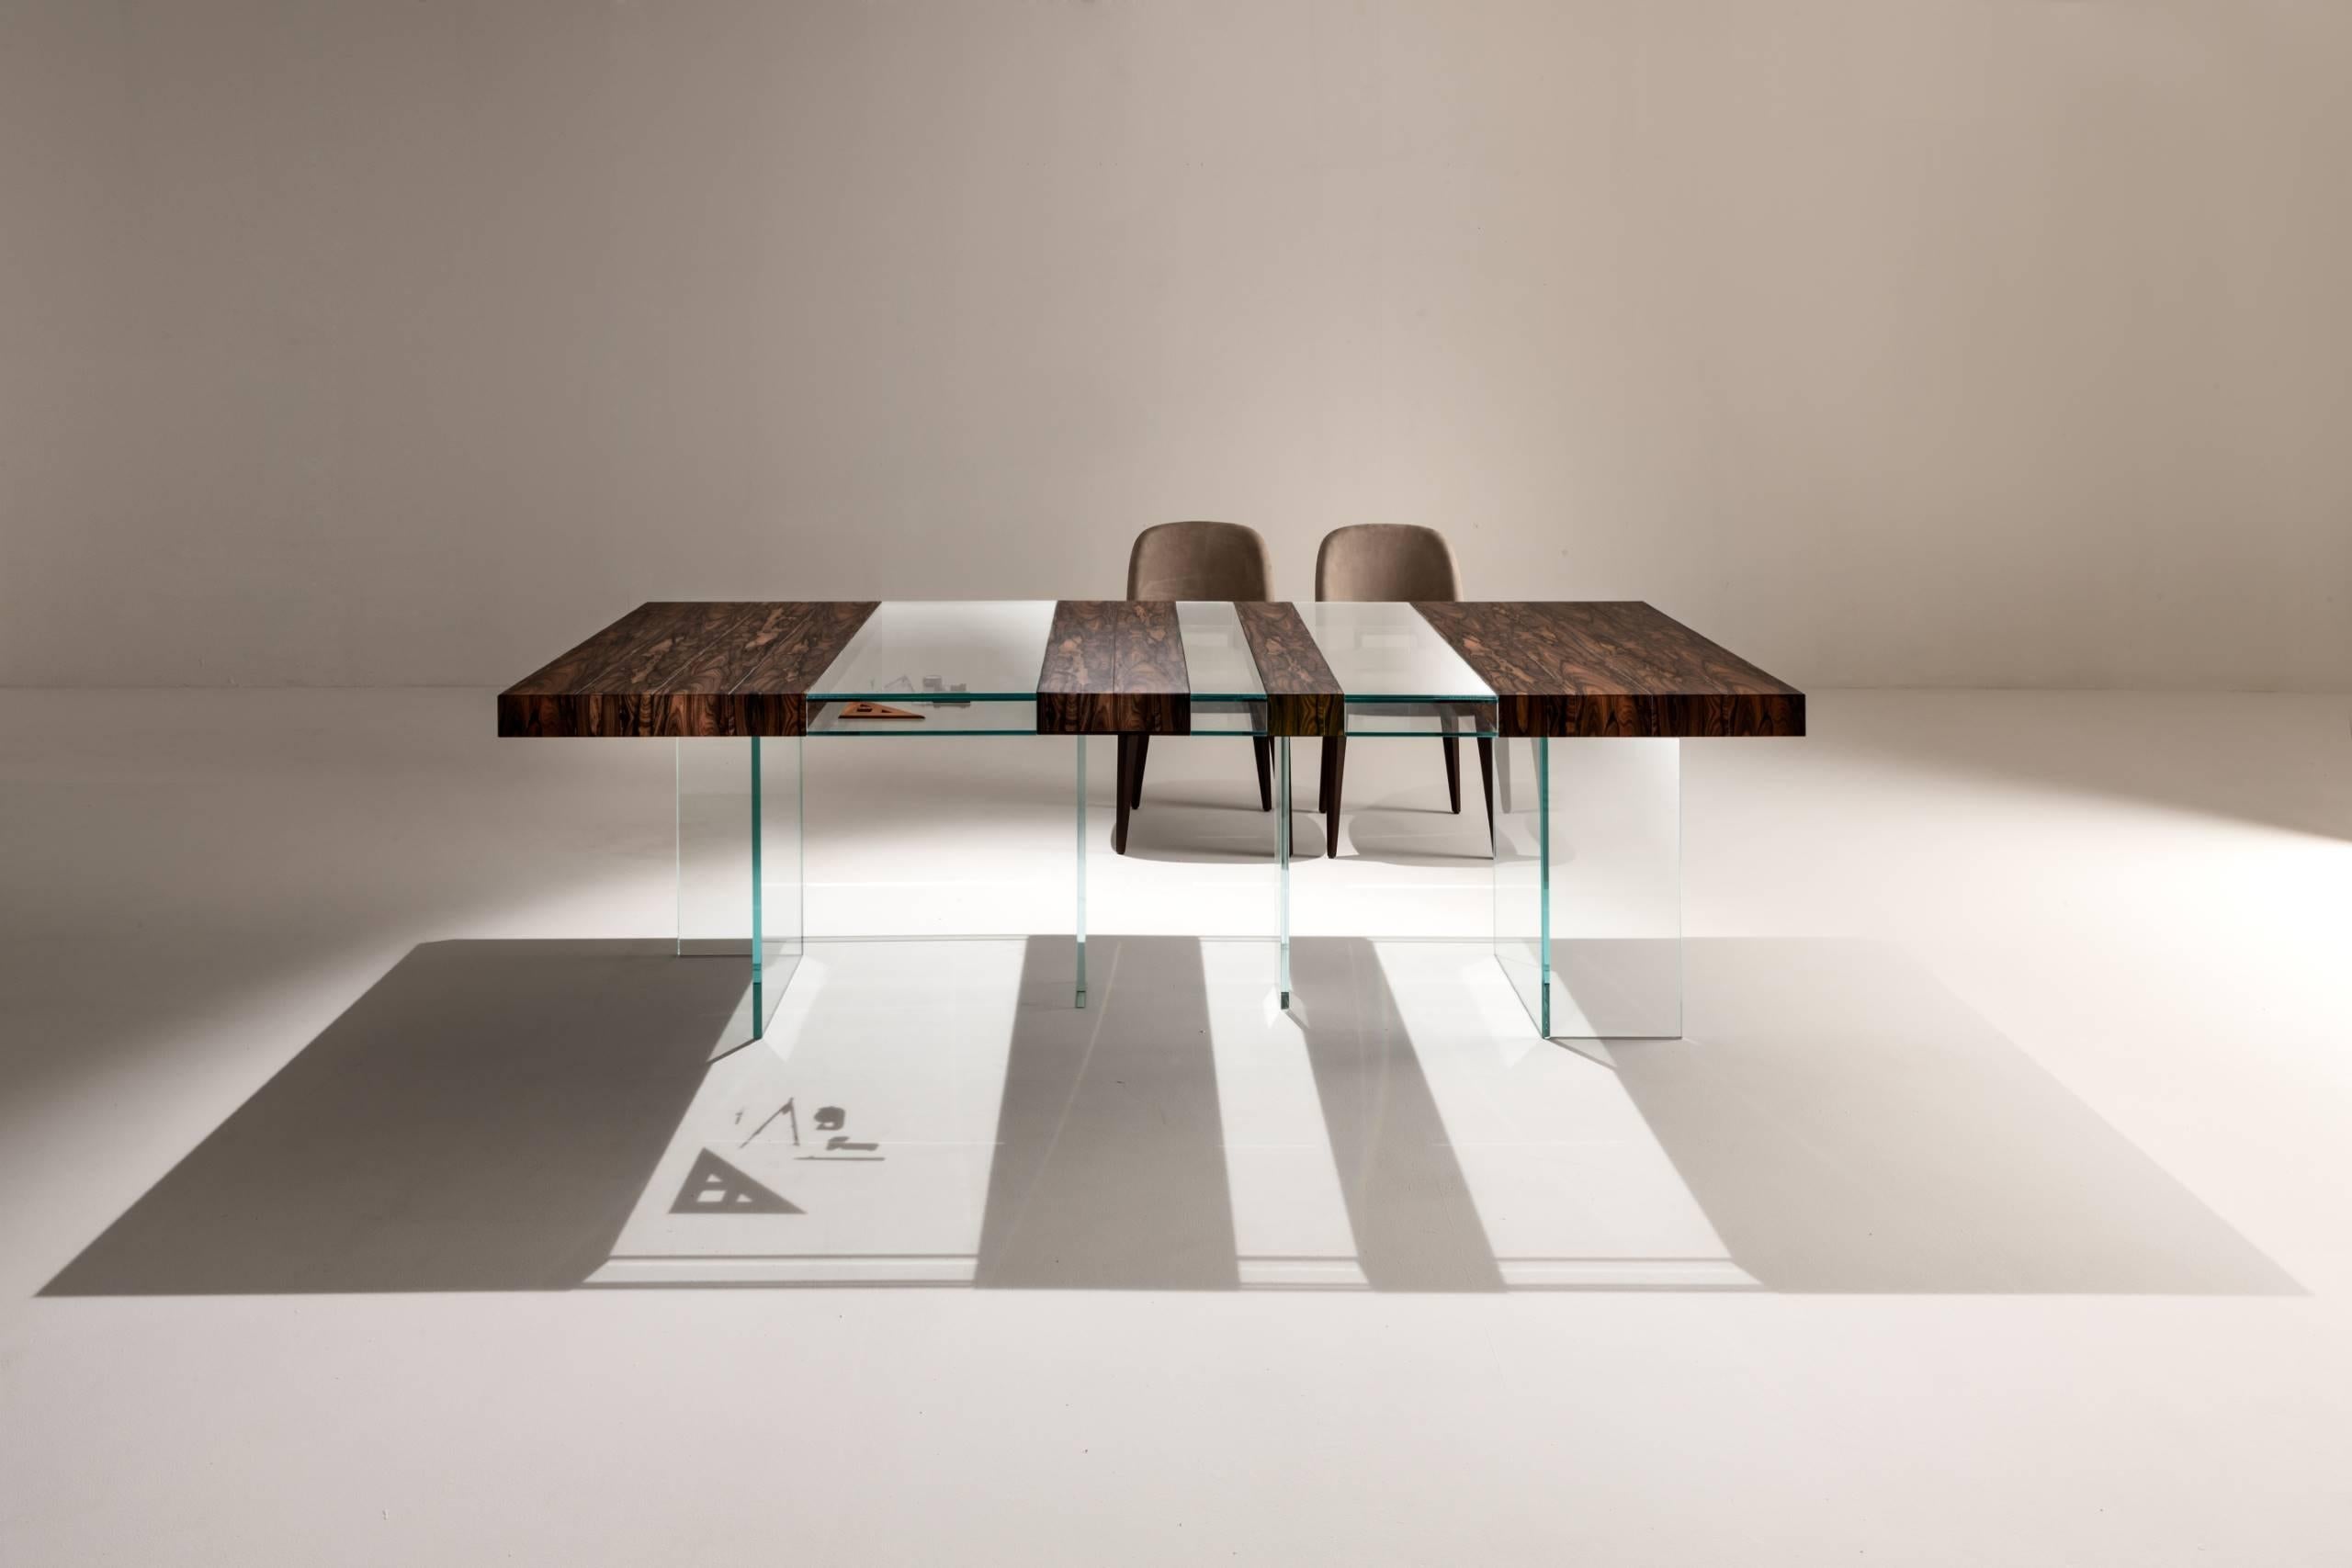 Rectangular table with modules in Ziricote and openable extra-clear crystal cases. Extra-clear crystal legs.

FINISH:
Ziricote and extra-clear crystal

The Elemento Table, also available in the Console version, together with the entire Moving